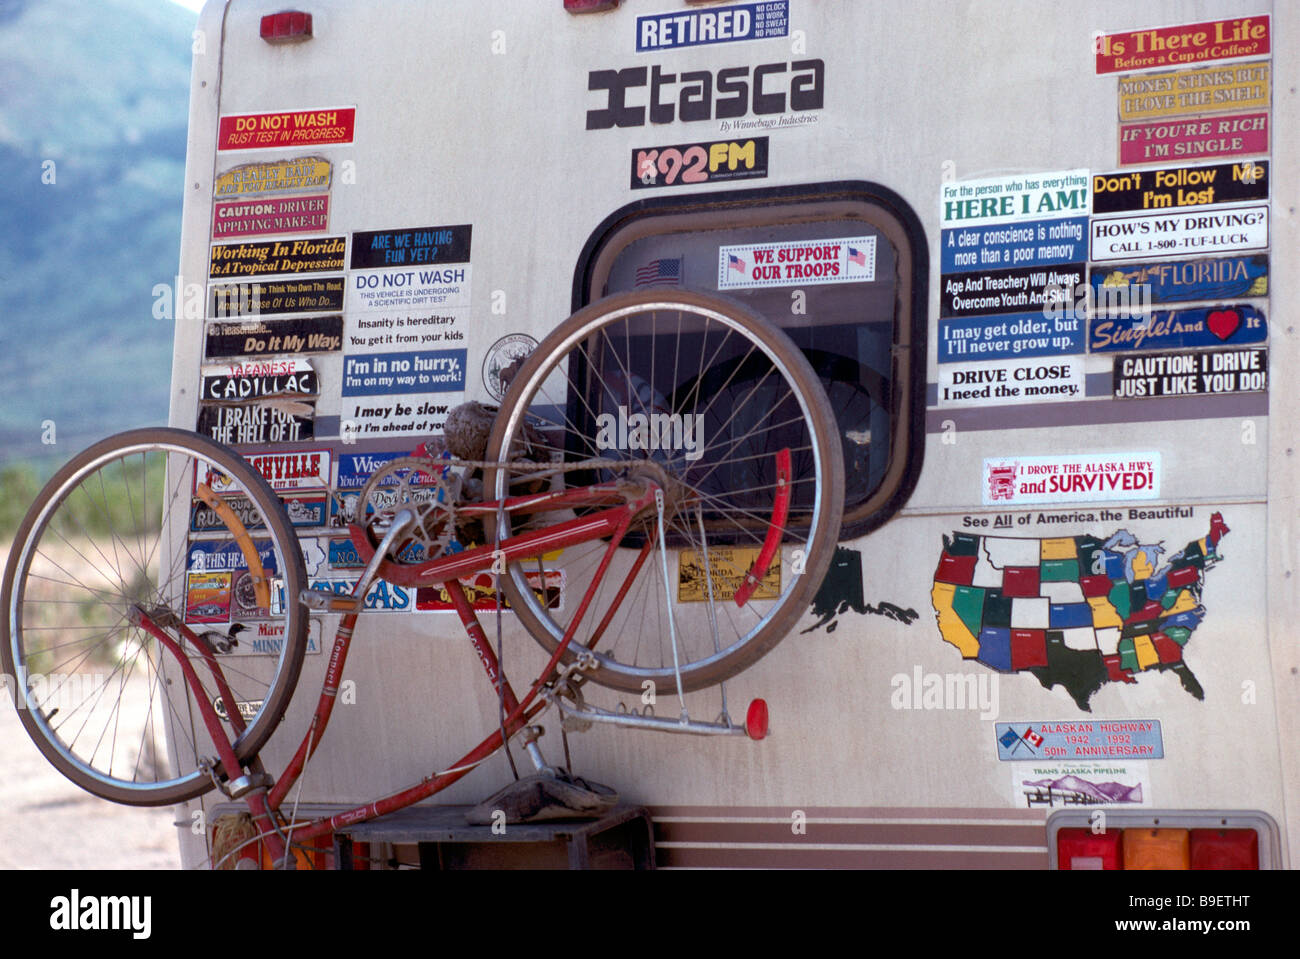 Bicycle and Funny Bumper Sticker Signs mounted on back of RV Recreational Vehicle Camper Stock Photo